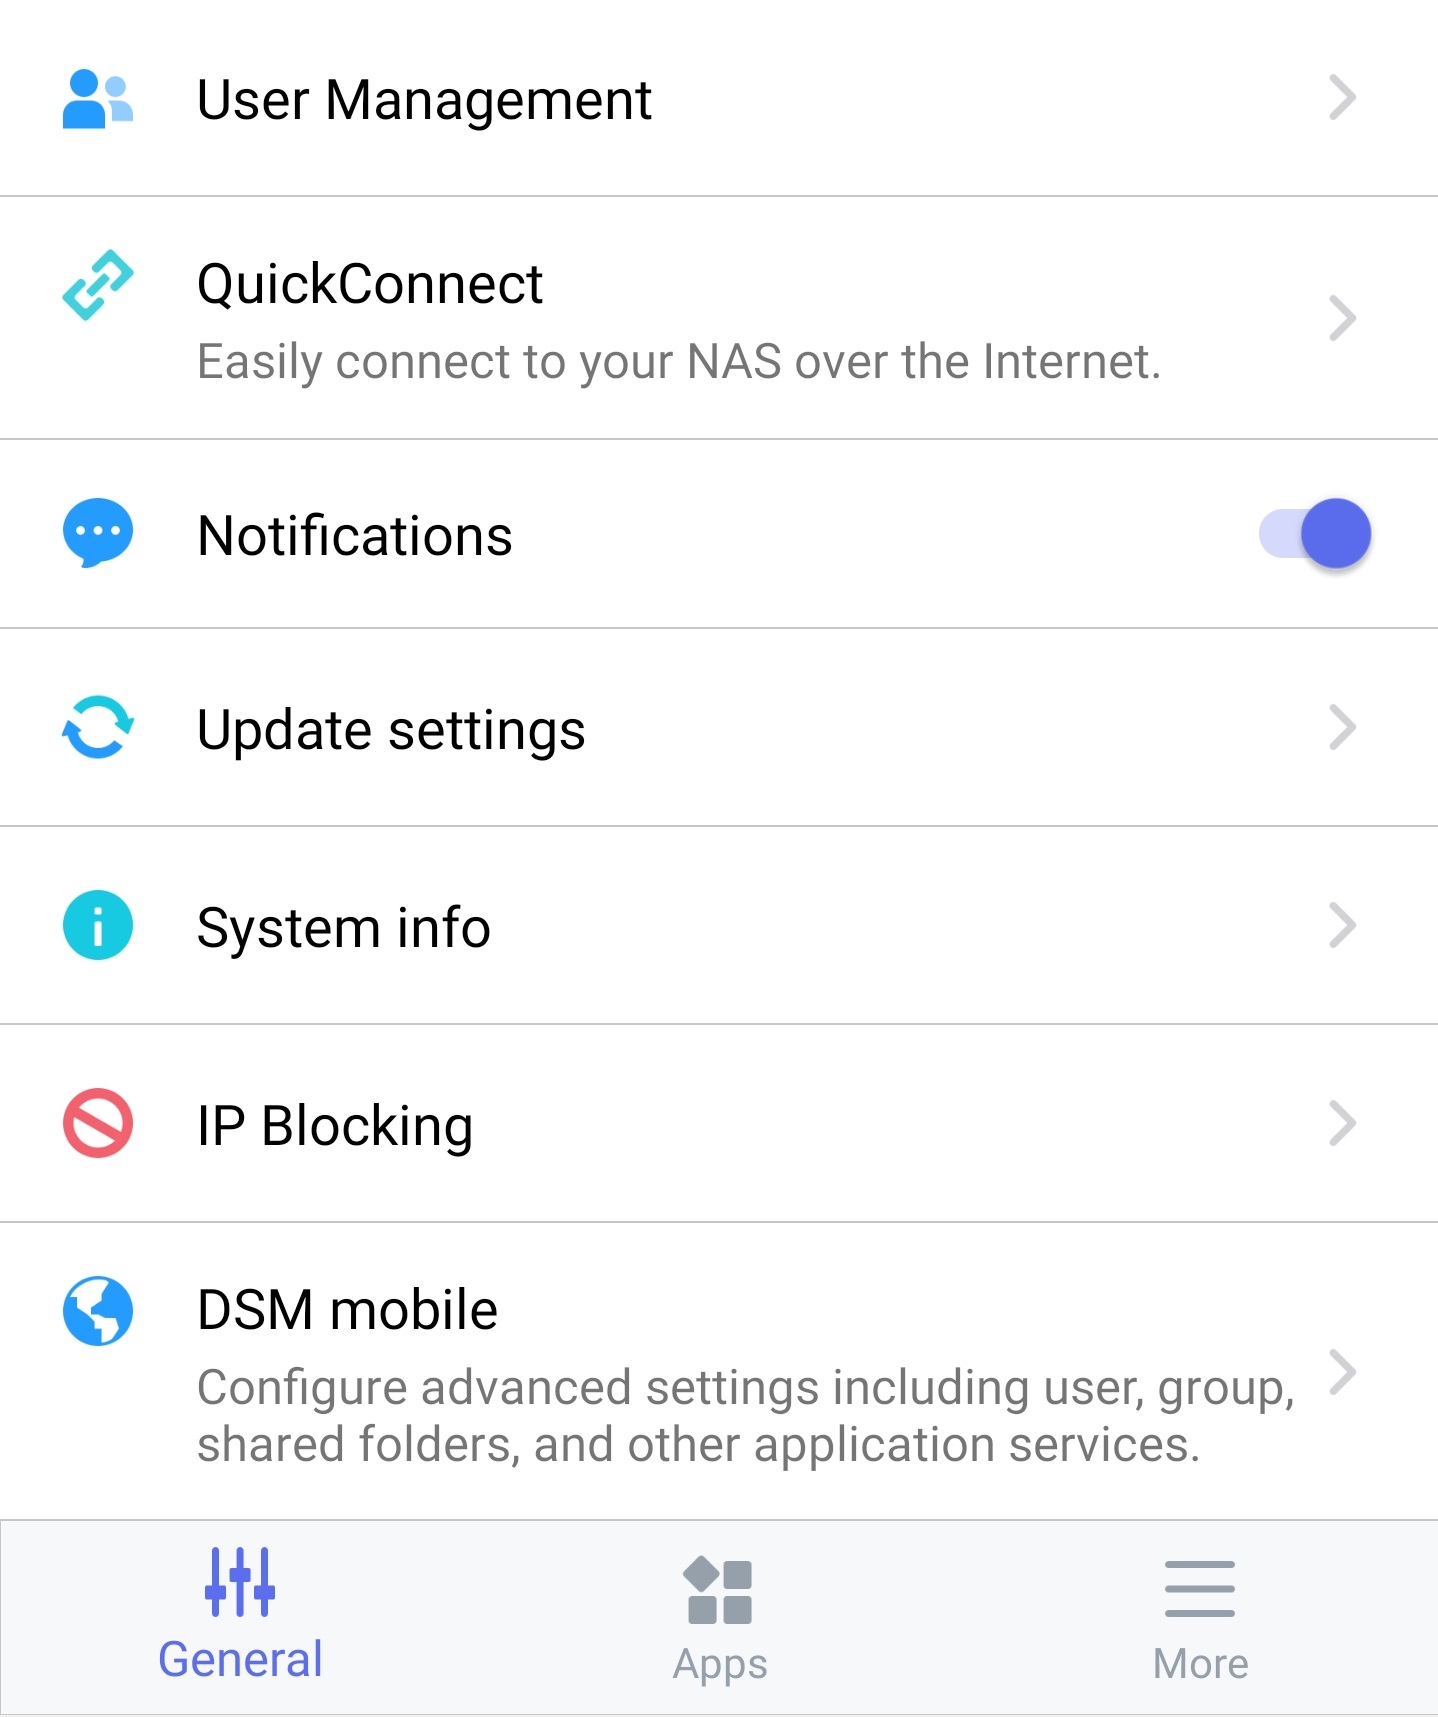 mobile device setup and configuration for notifications